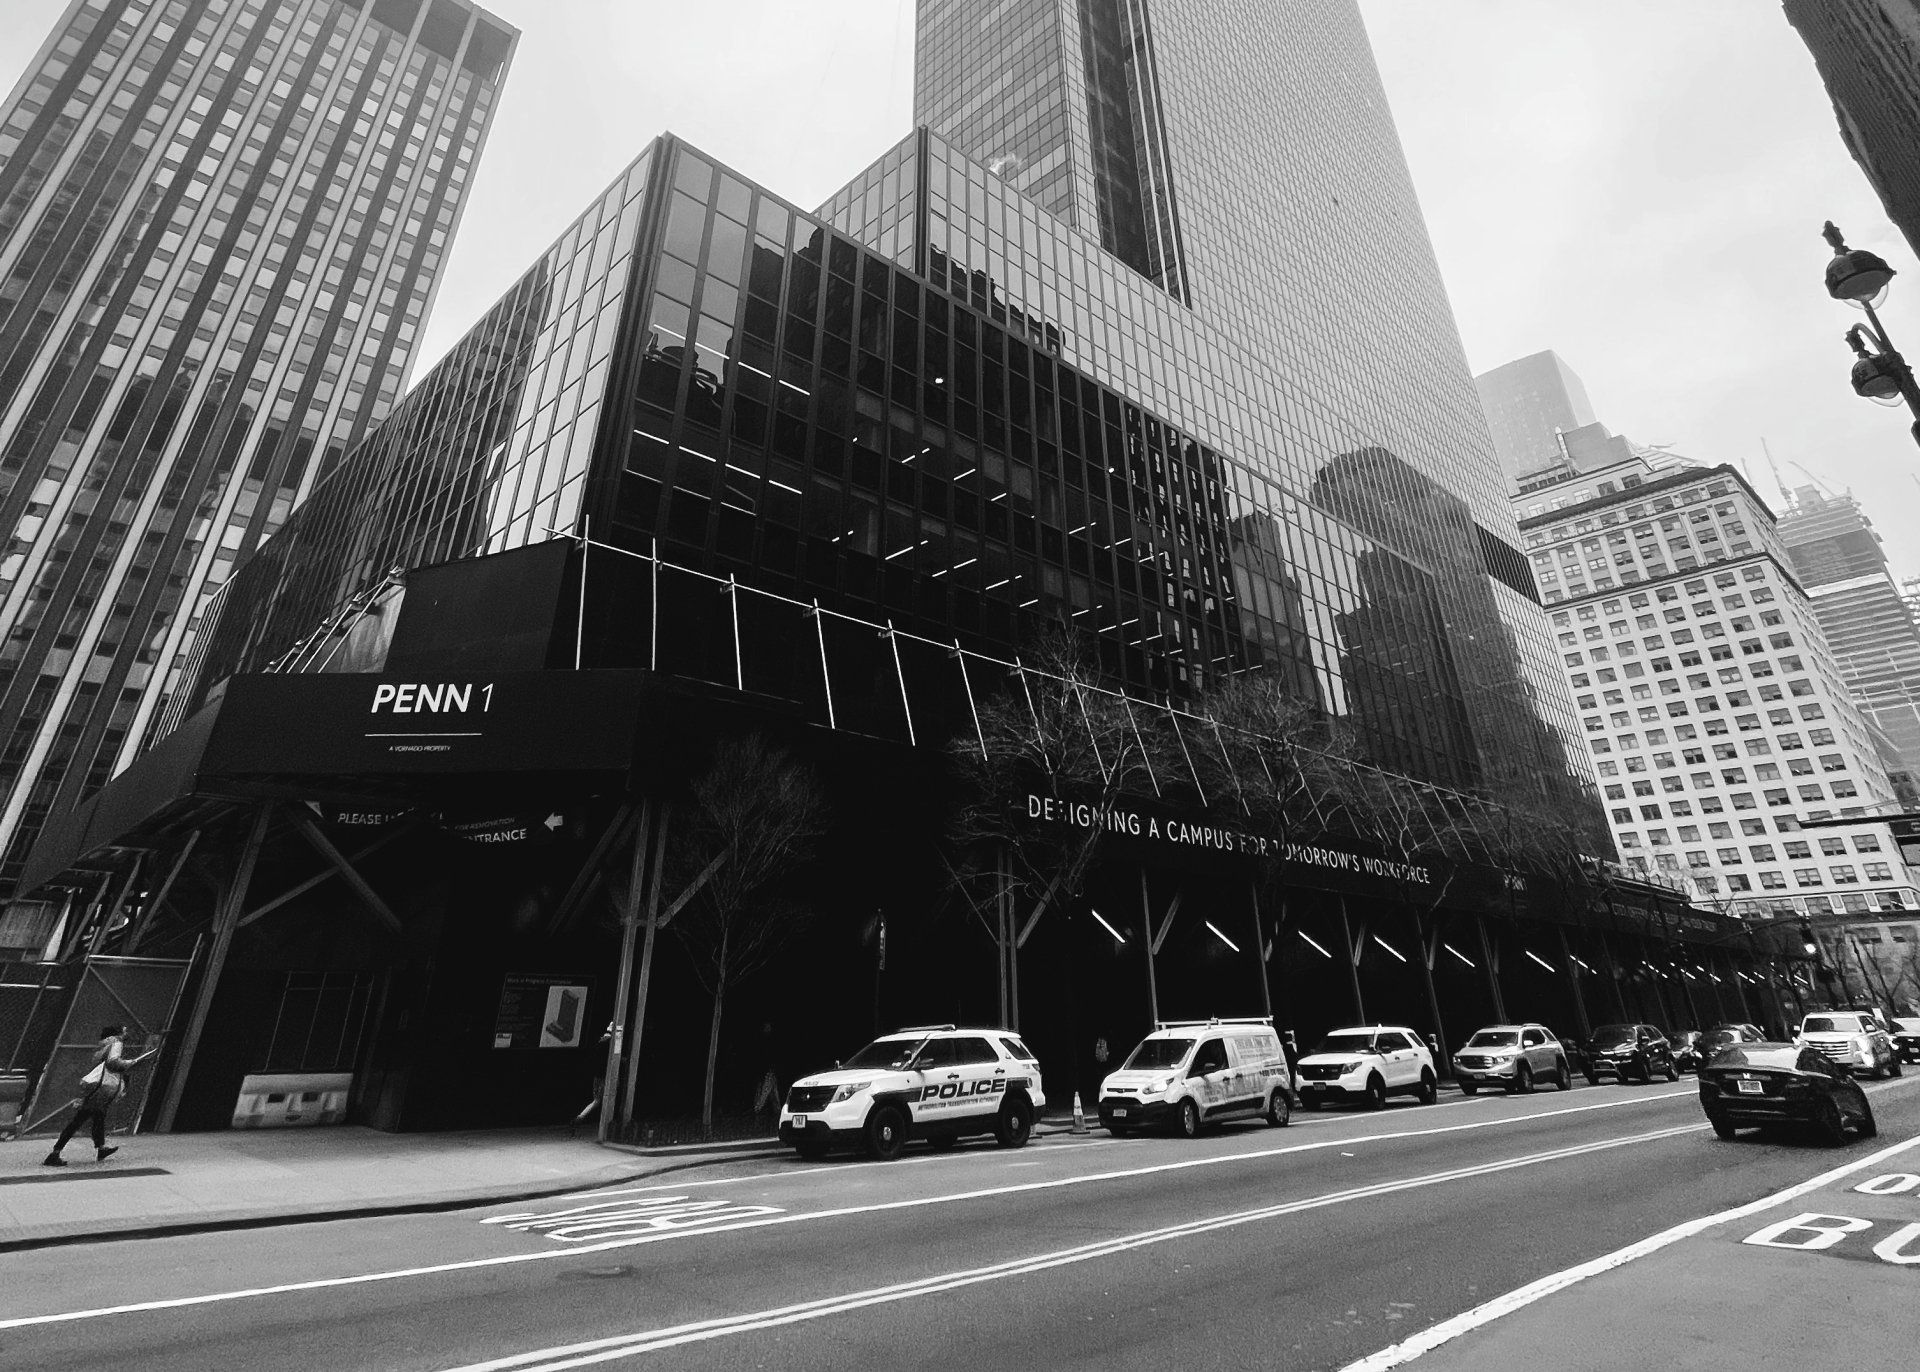 black and white photo of Penn 1, a building on West 34th Street.